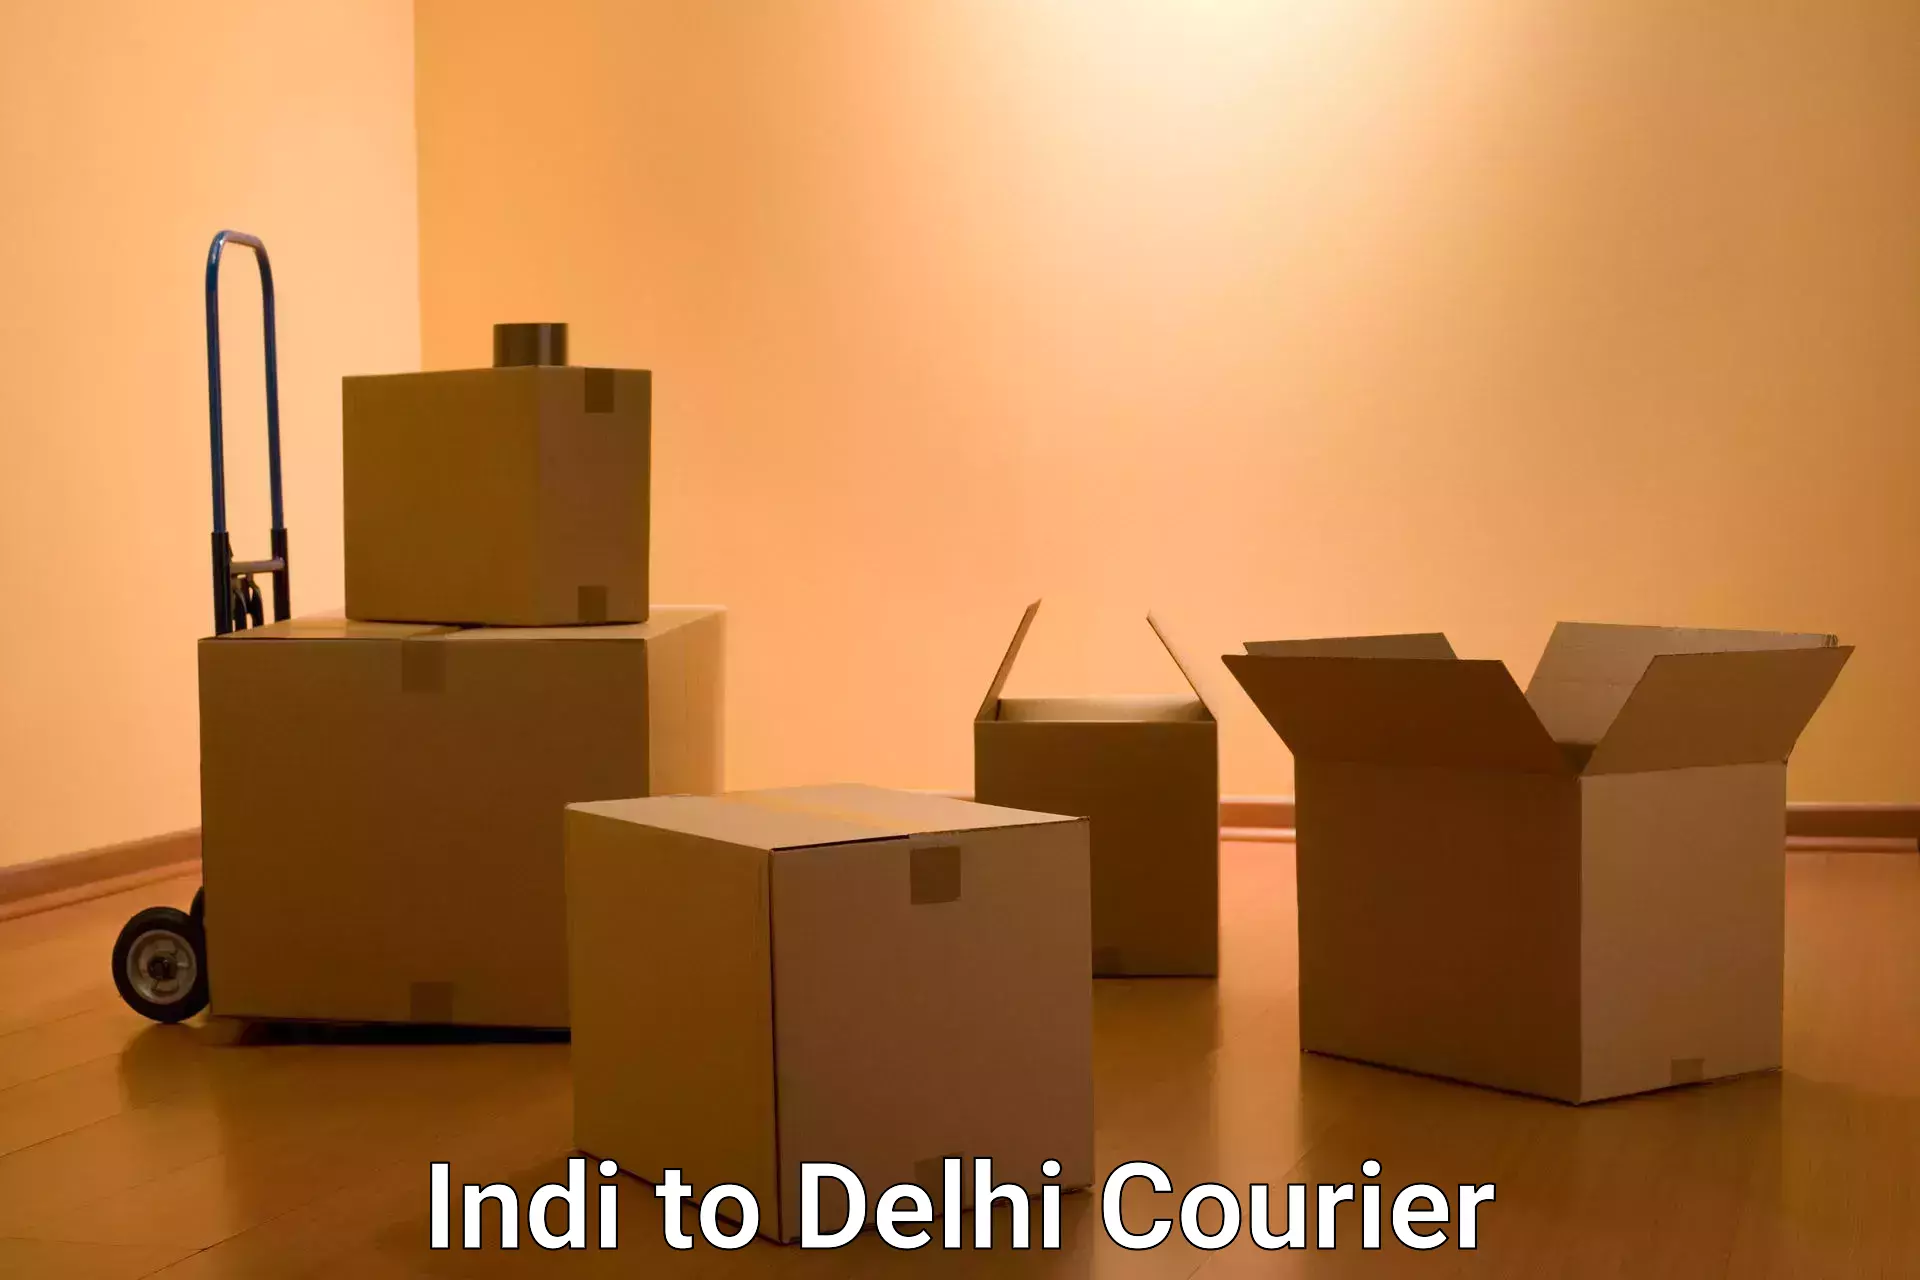 Nationwide delivery network Indi to Delhi